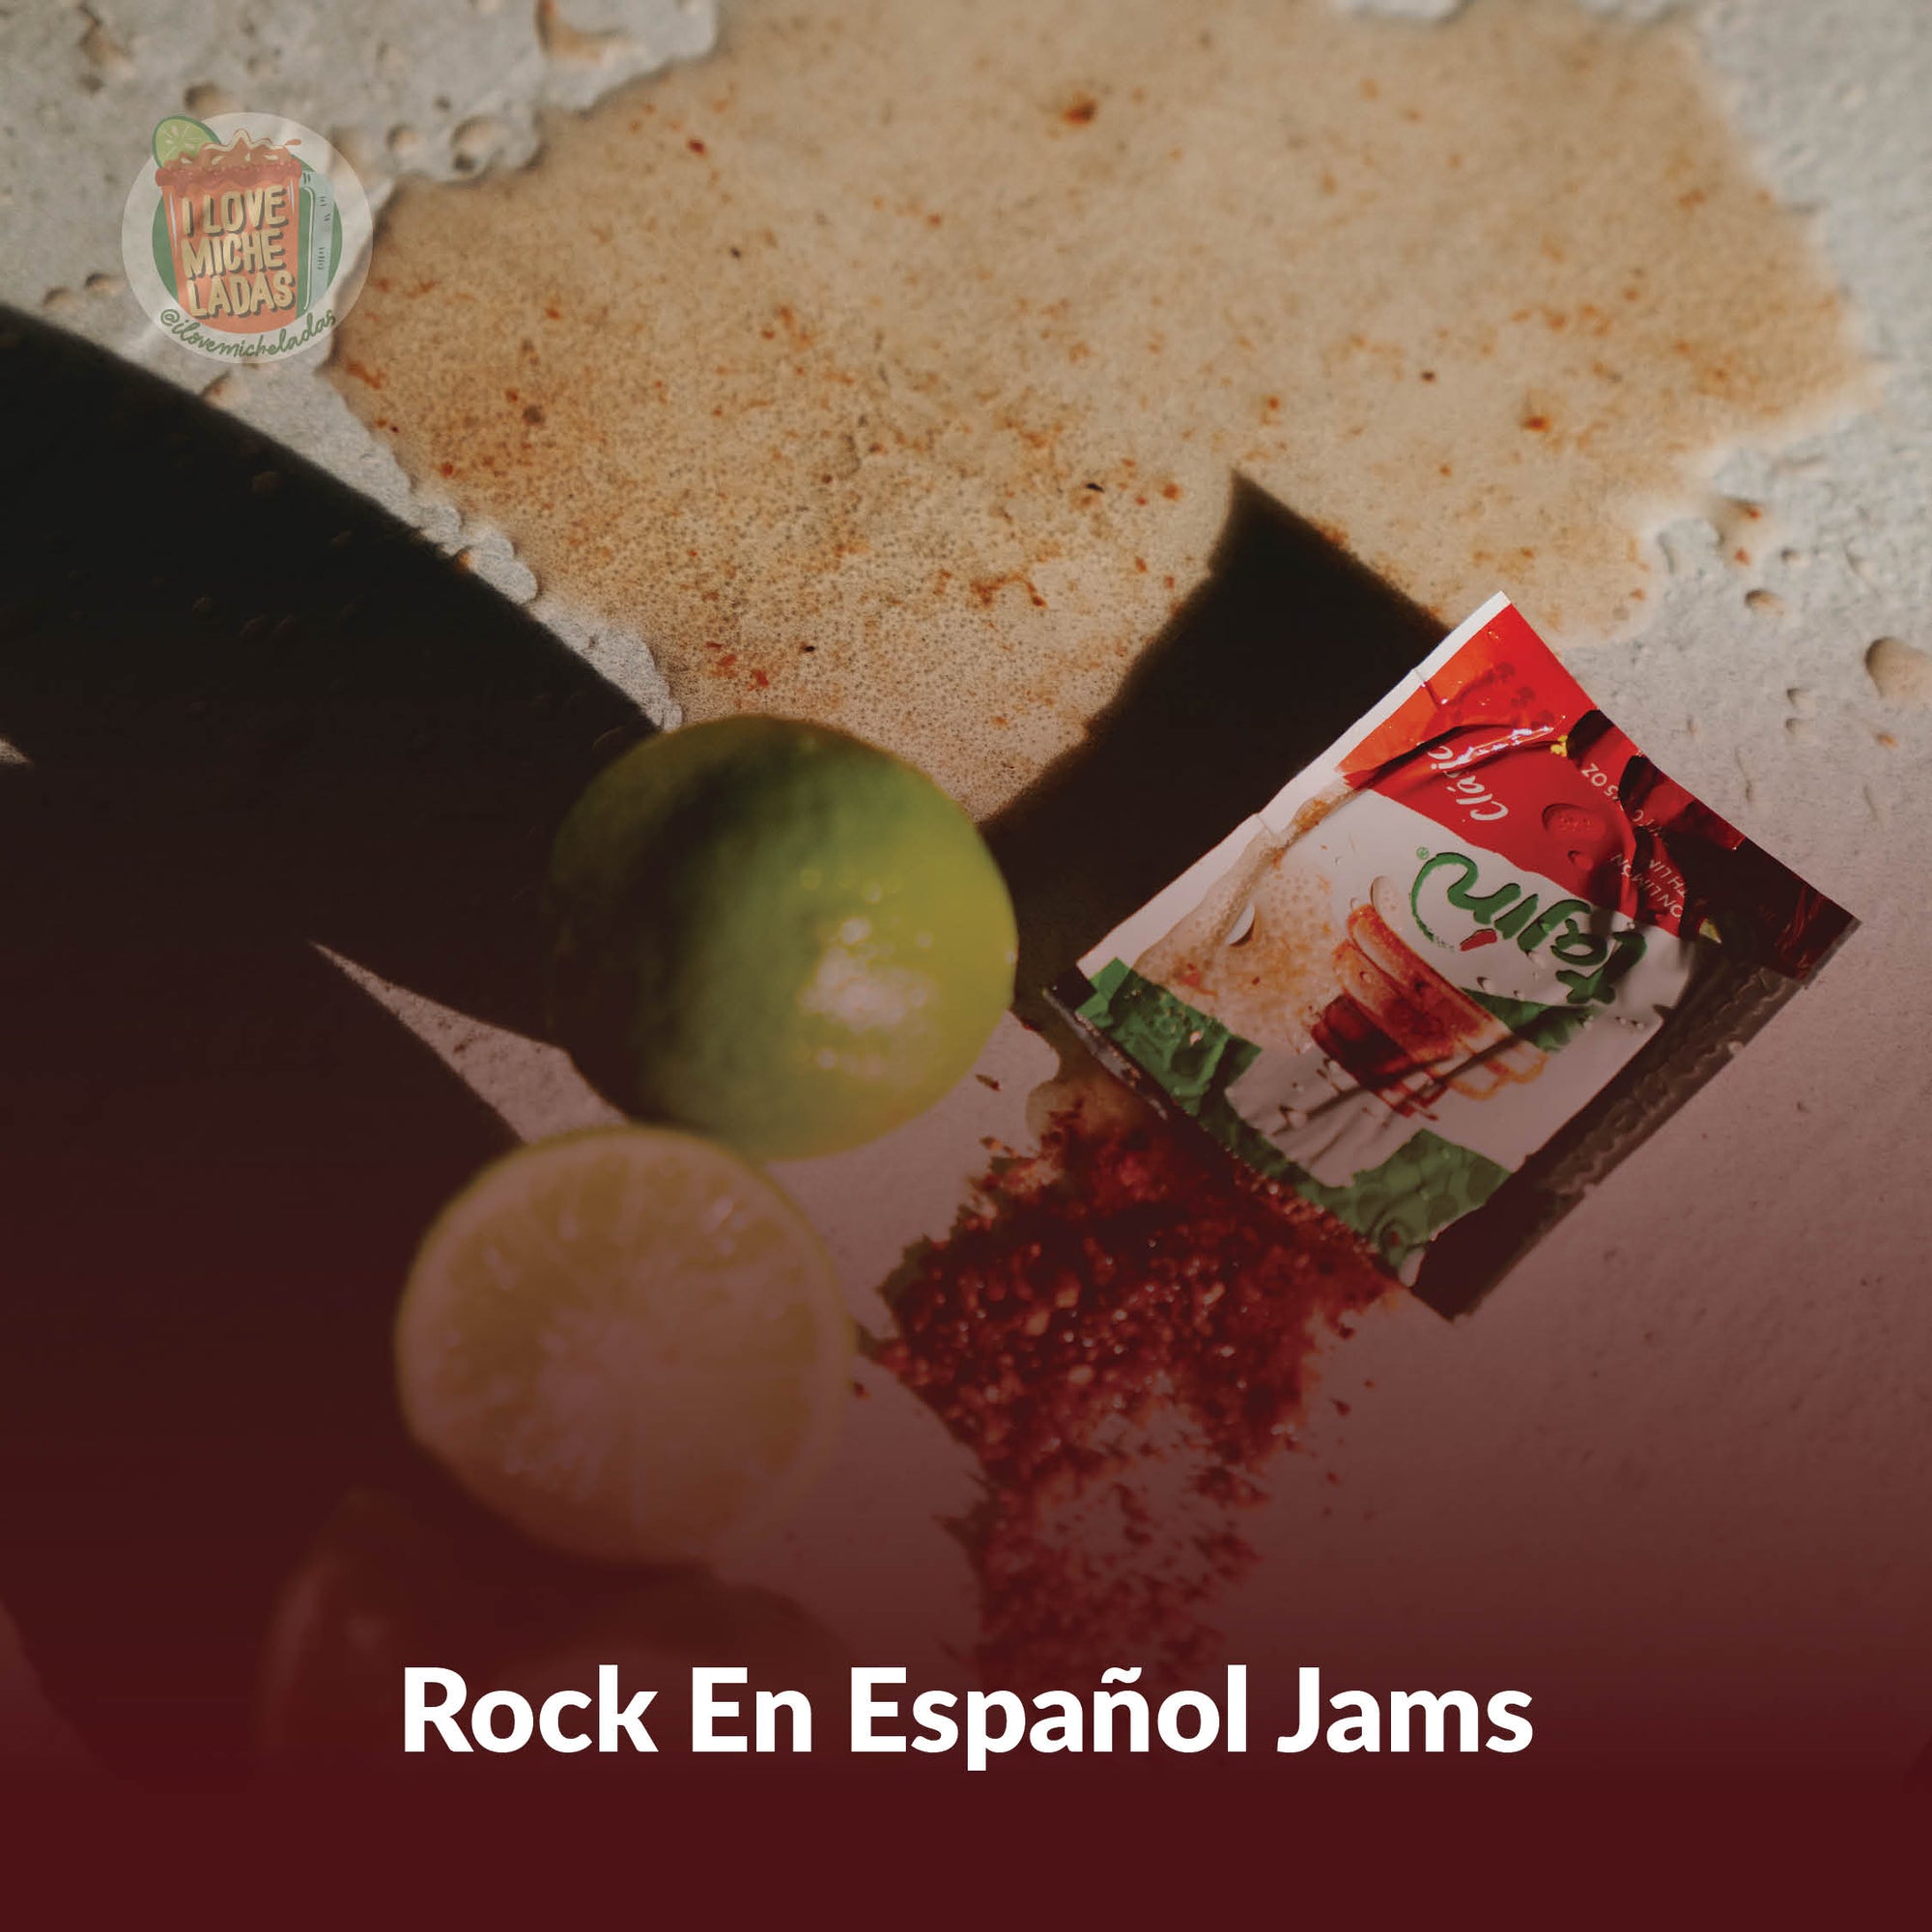 MICHE MIX OF THE WEEK: THE ONE WITH THE ROCK EN ESPAÑOL JAMS